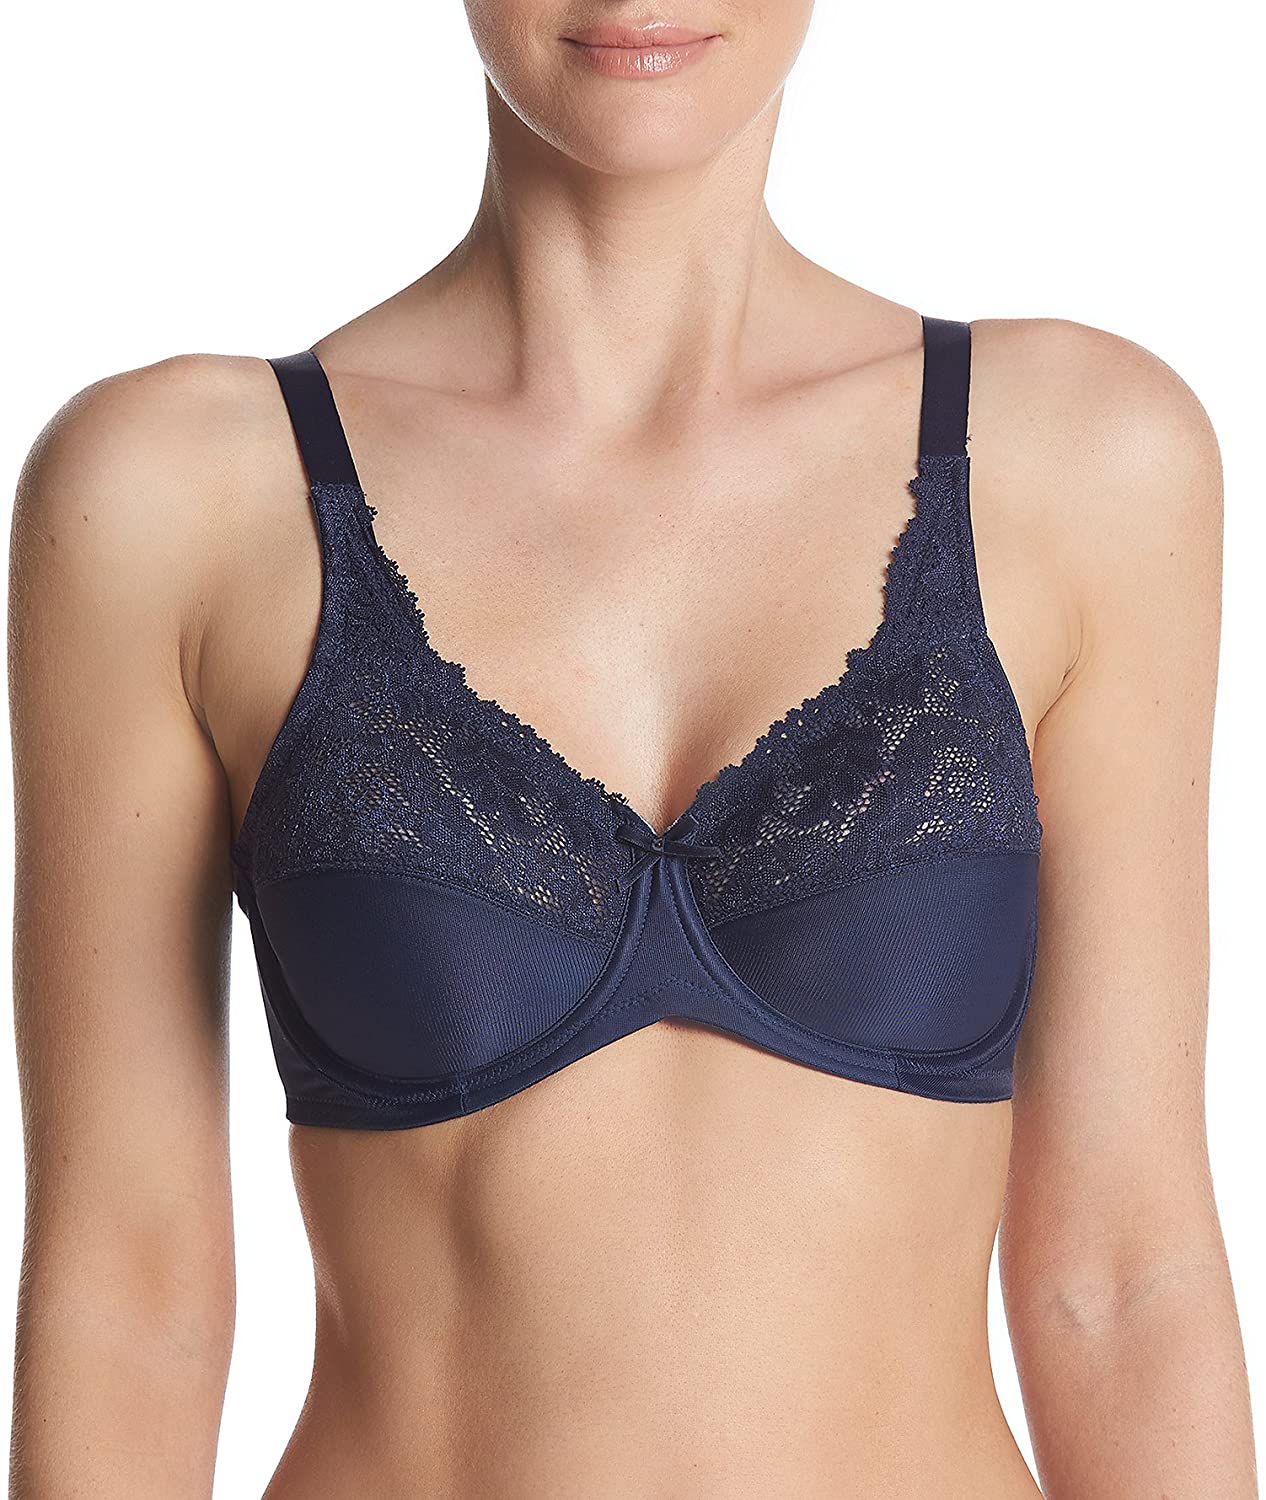 Lilyette 738994222671 Tailored Minimizer Bra with Lace Trim by